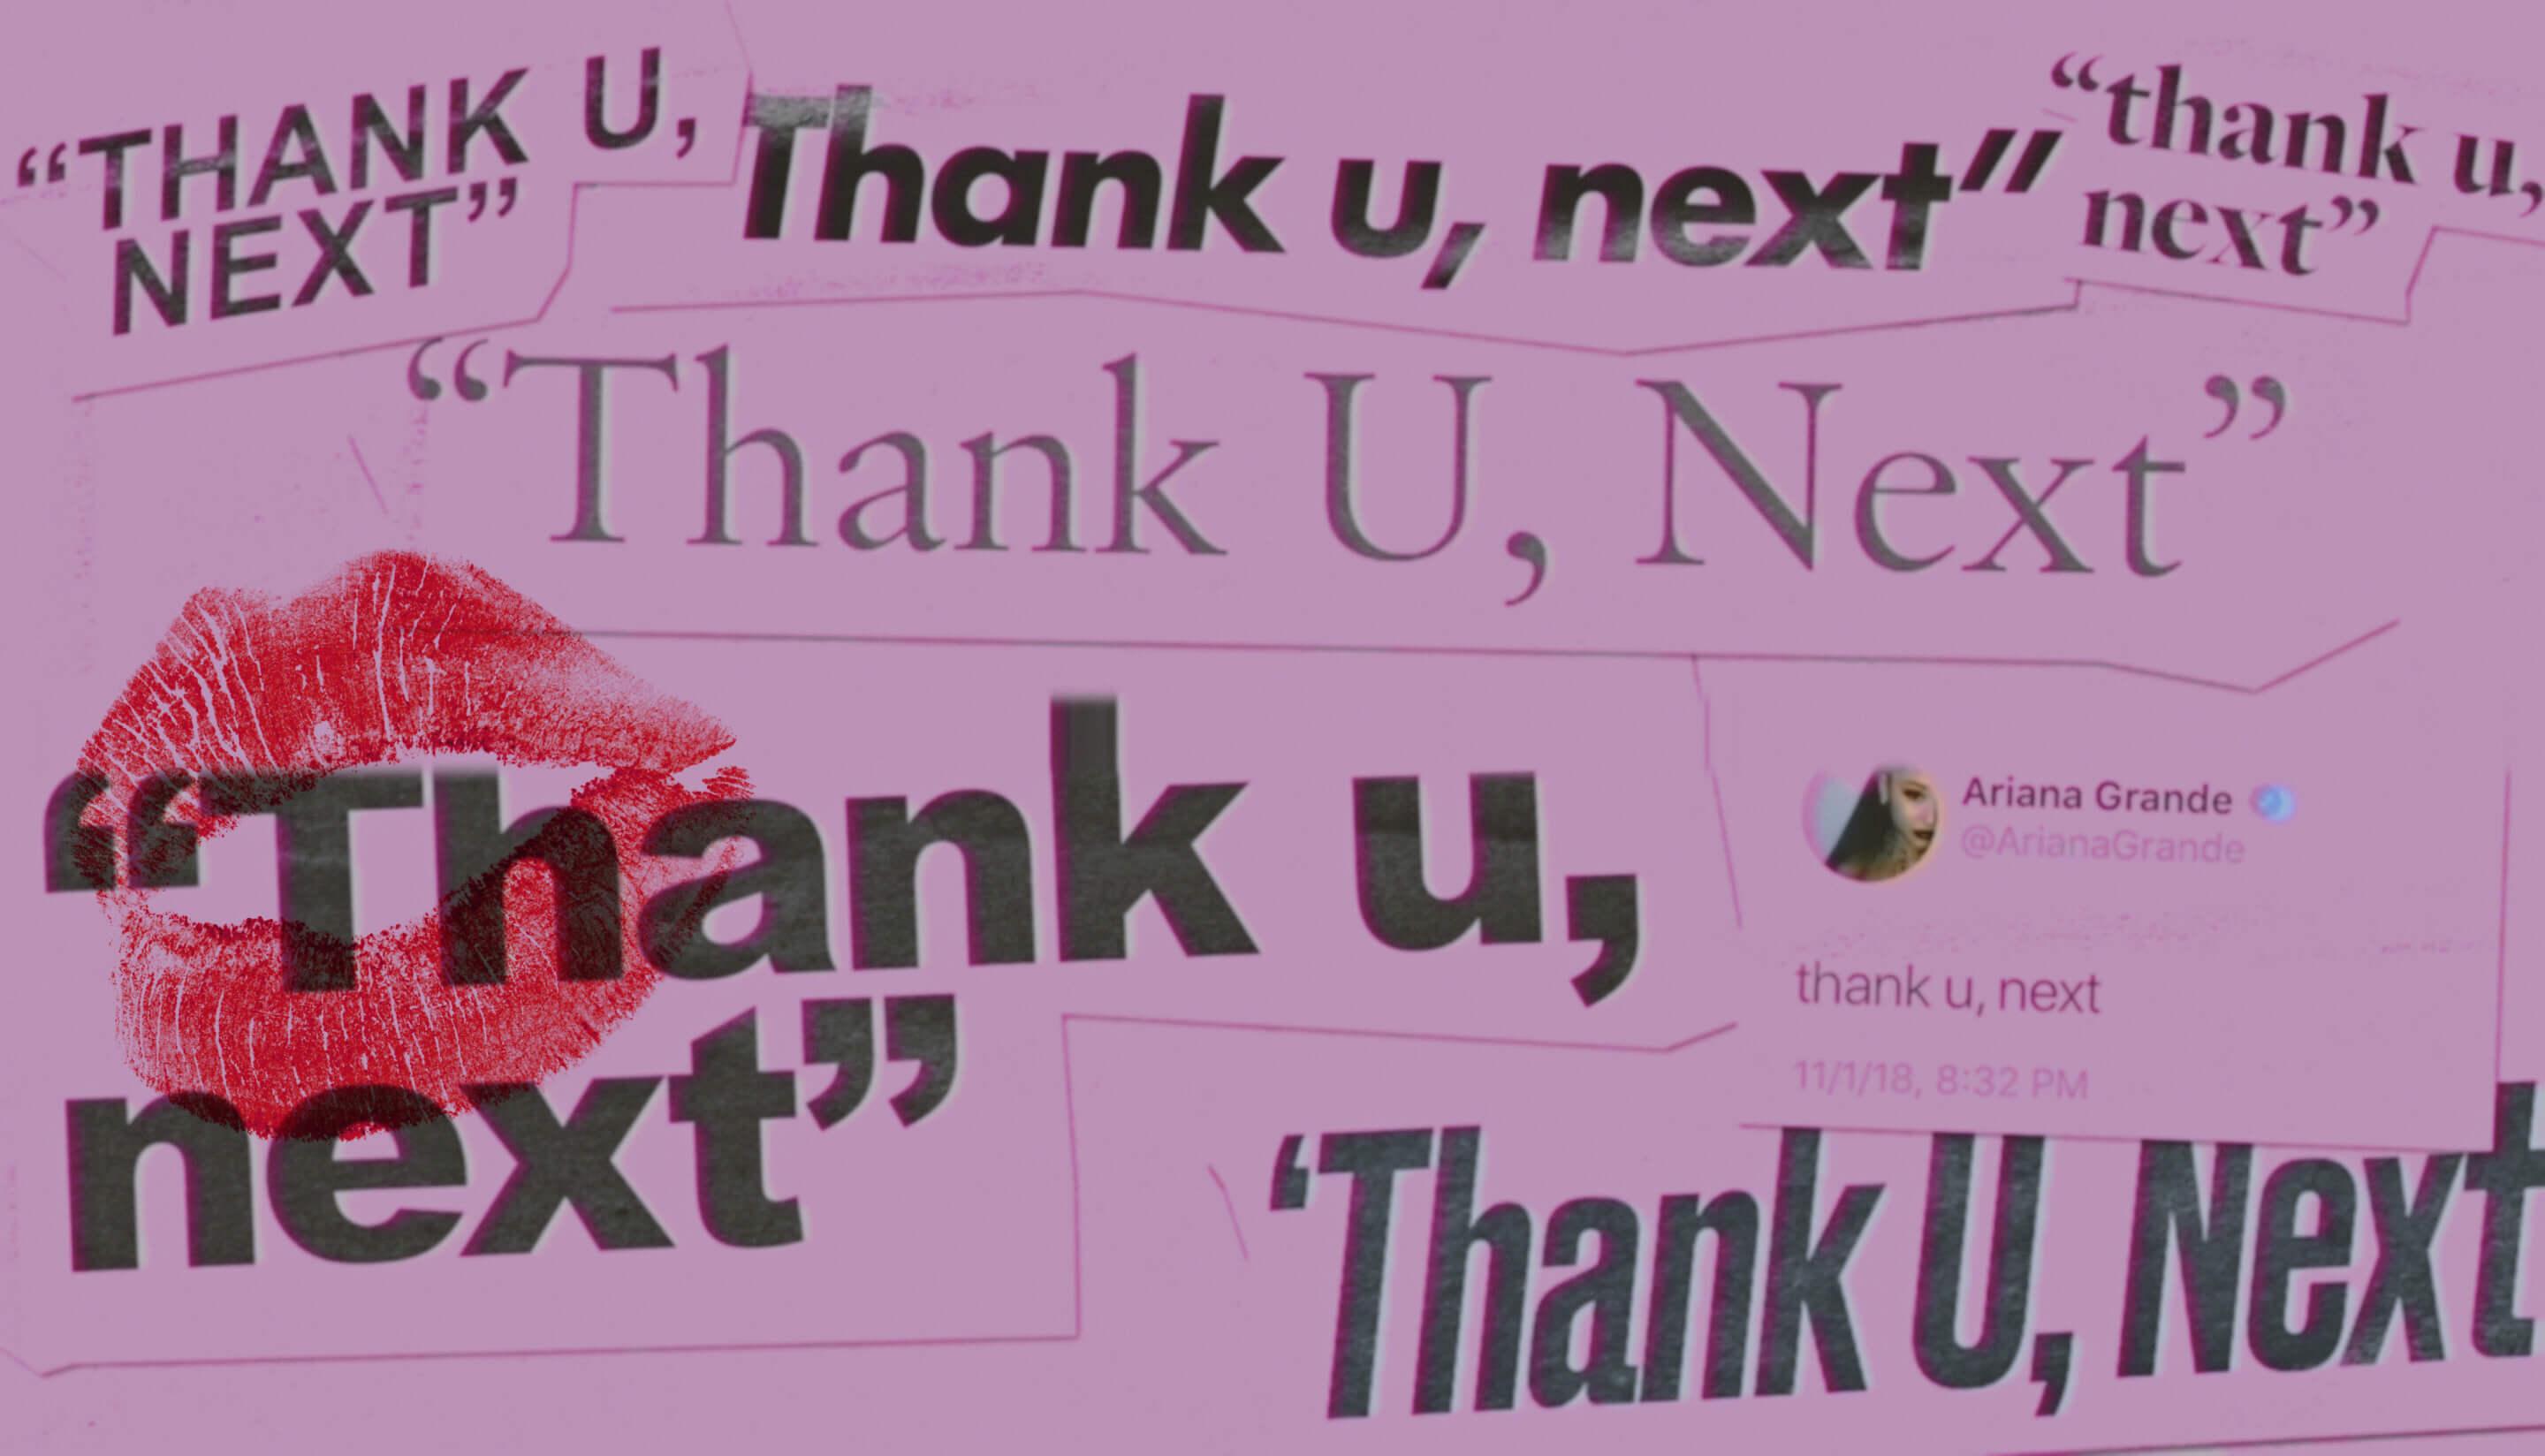 Ariana Grande's Released The Long Awaited Video “Thank U, Next